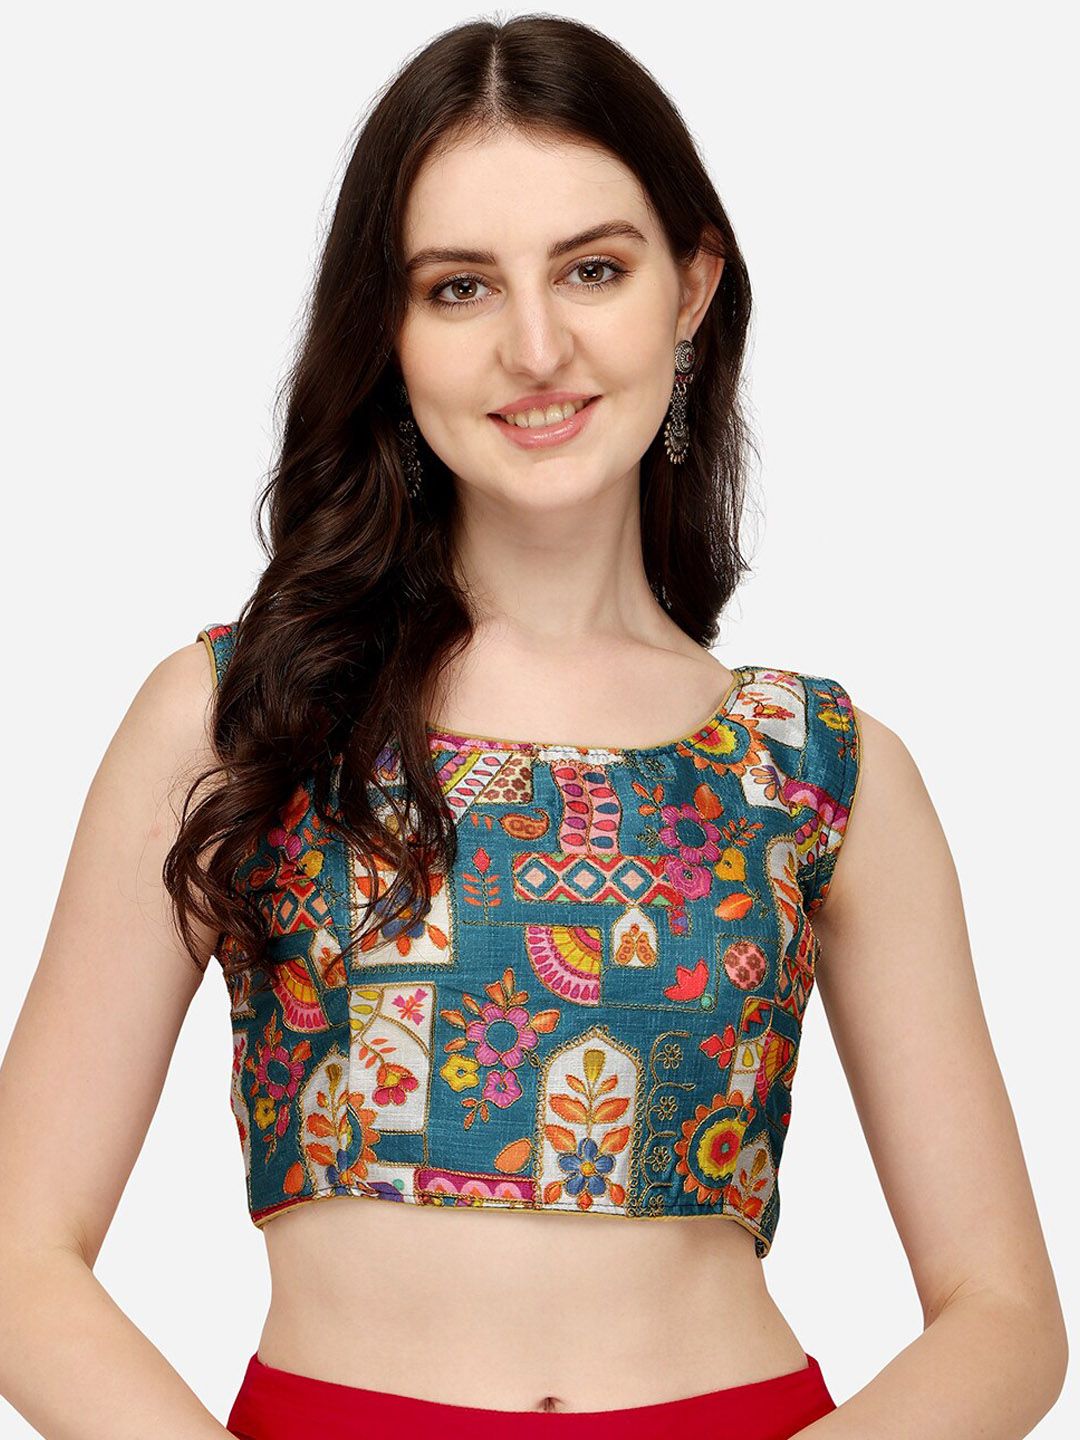 Sumaira Tex Women Turquoise Blue Digital Printed Embroidered Saree Blouse Price in India